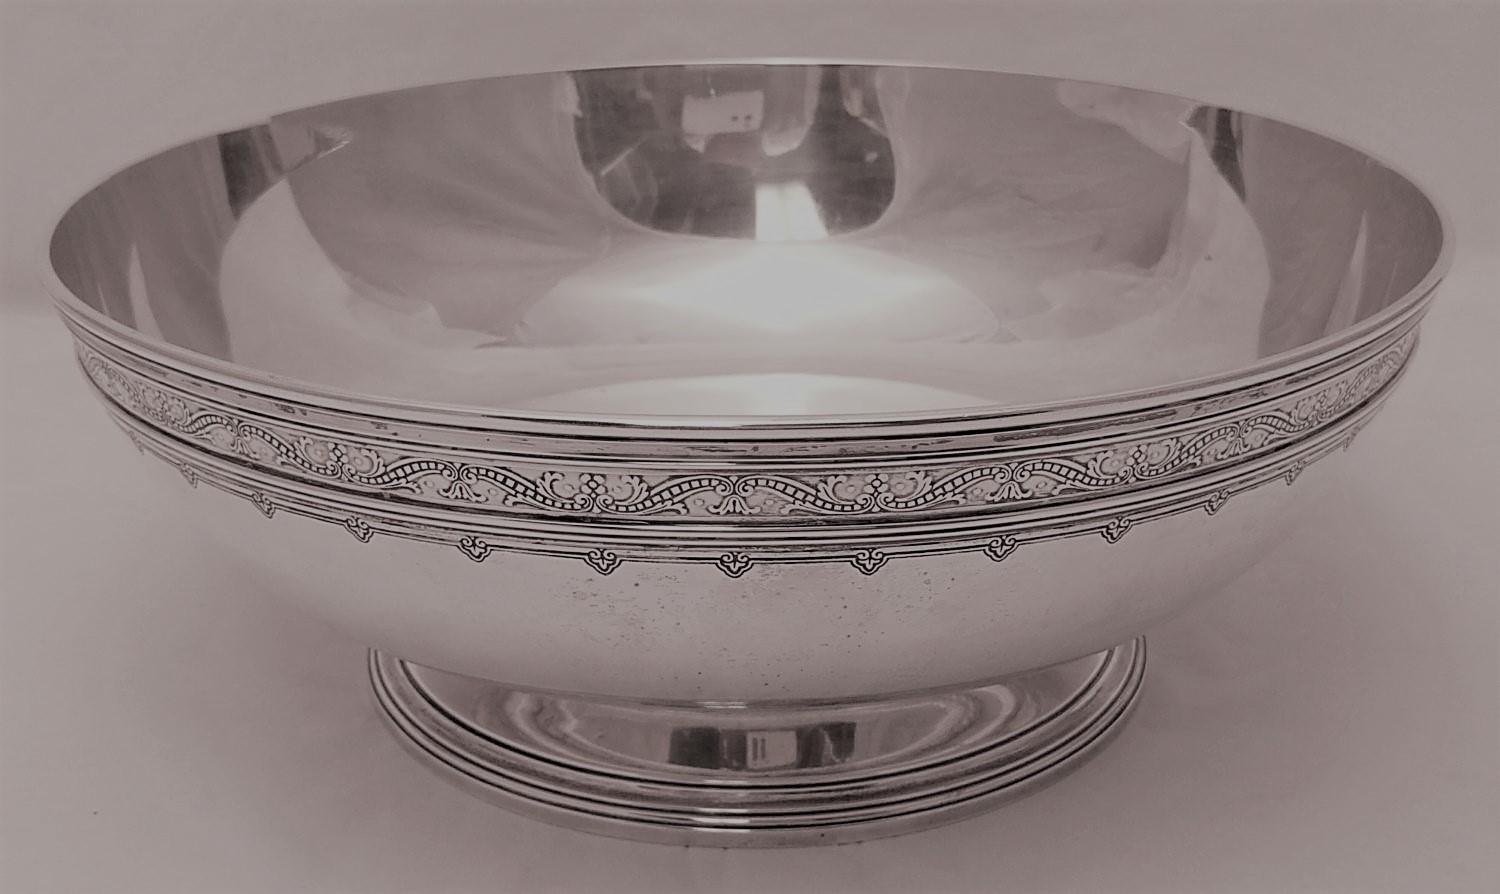 American Tiffany & Co. Sterling Silver Centerpiece Bowl from 1914 in Art Deco Style